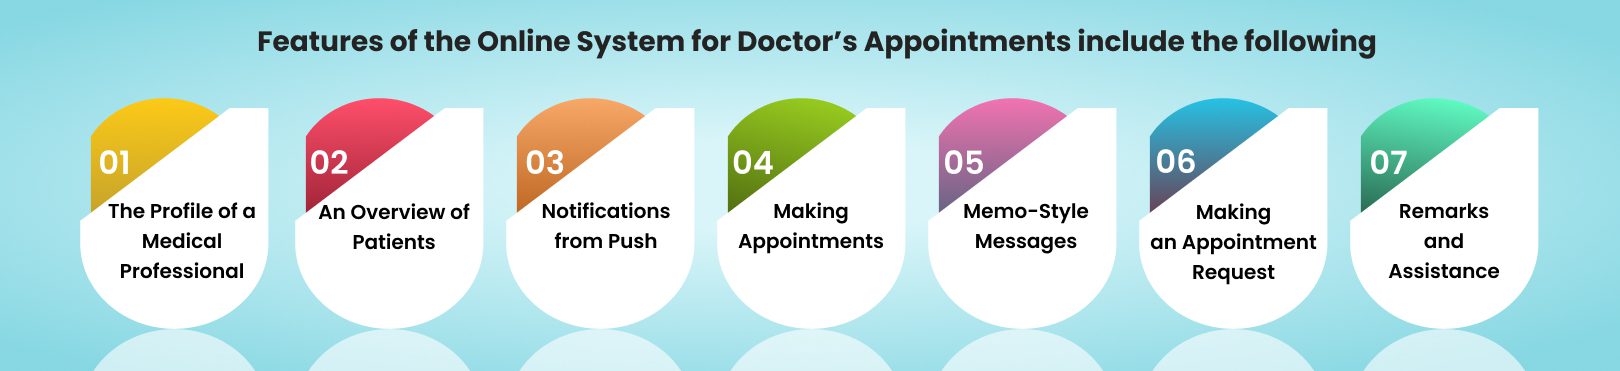 Some features of the online system for doctor’s appointments include the following